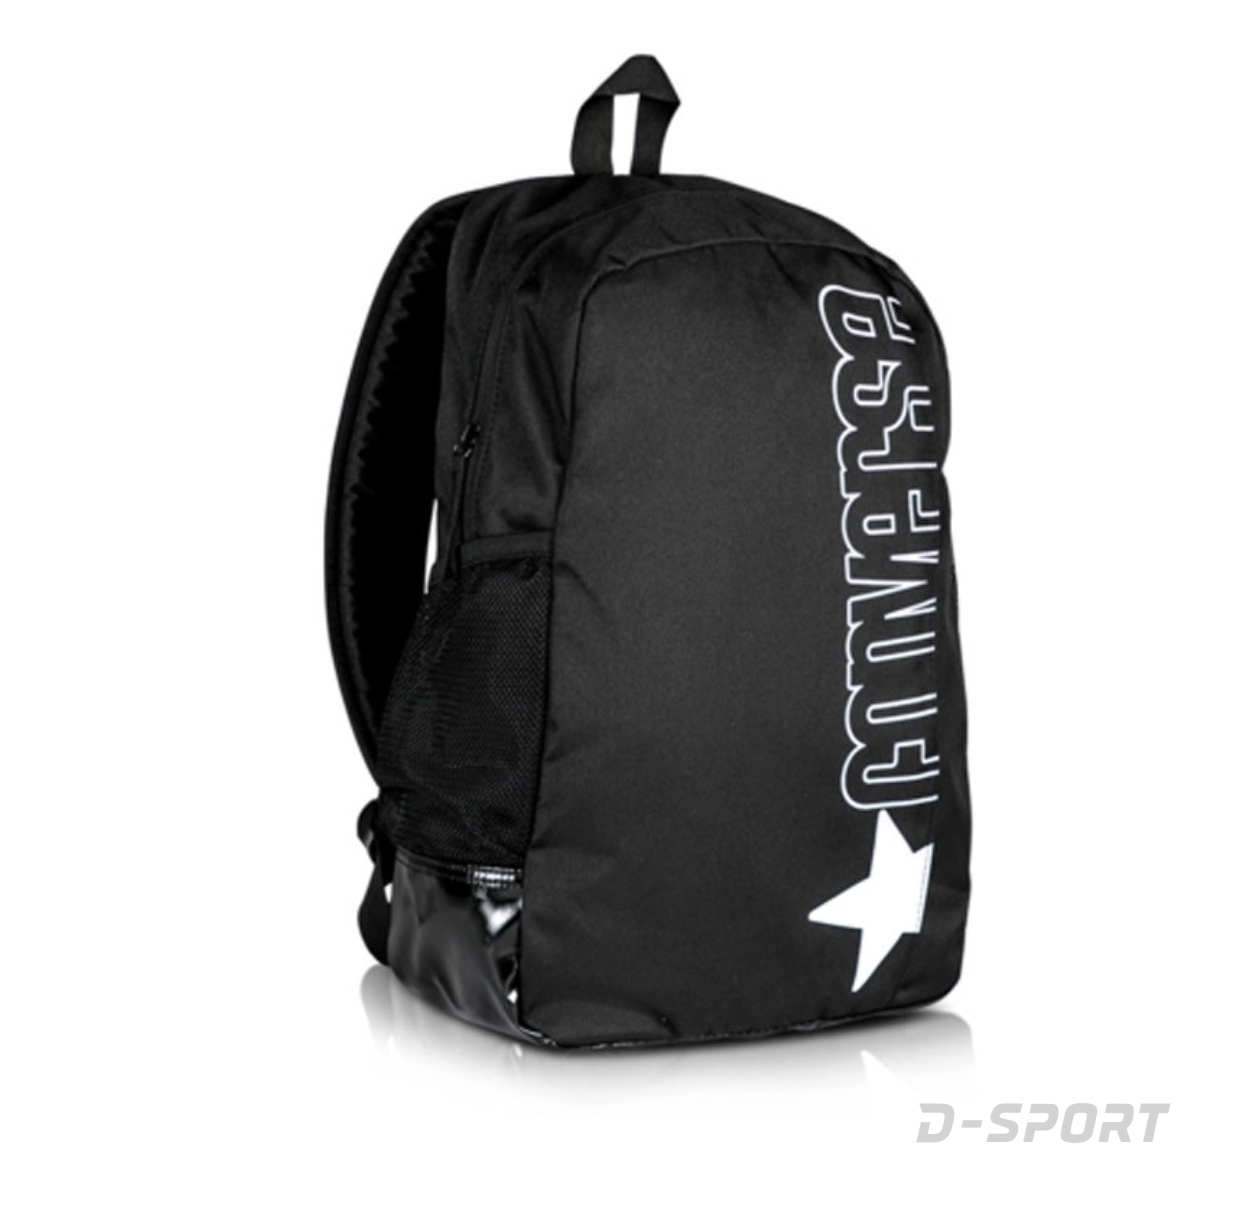 SPEED 2 BACKPACK